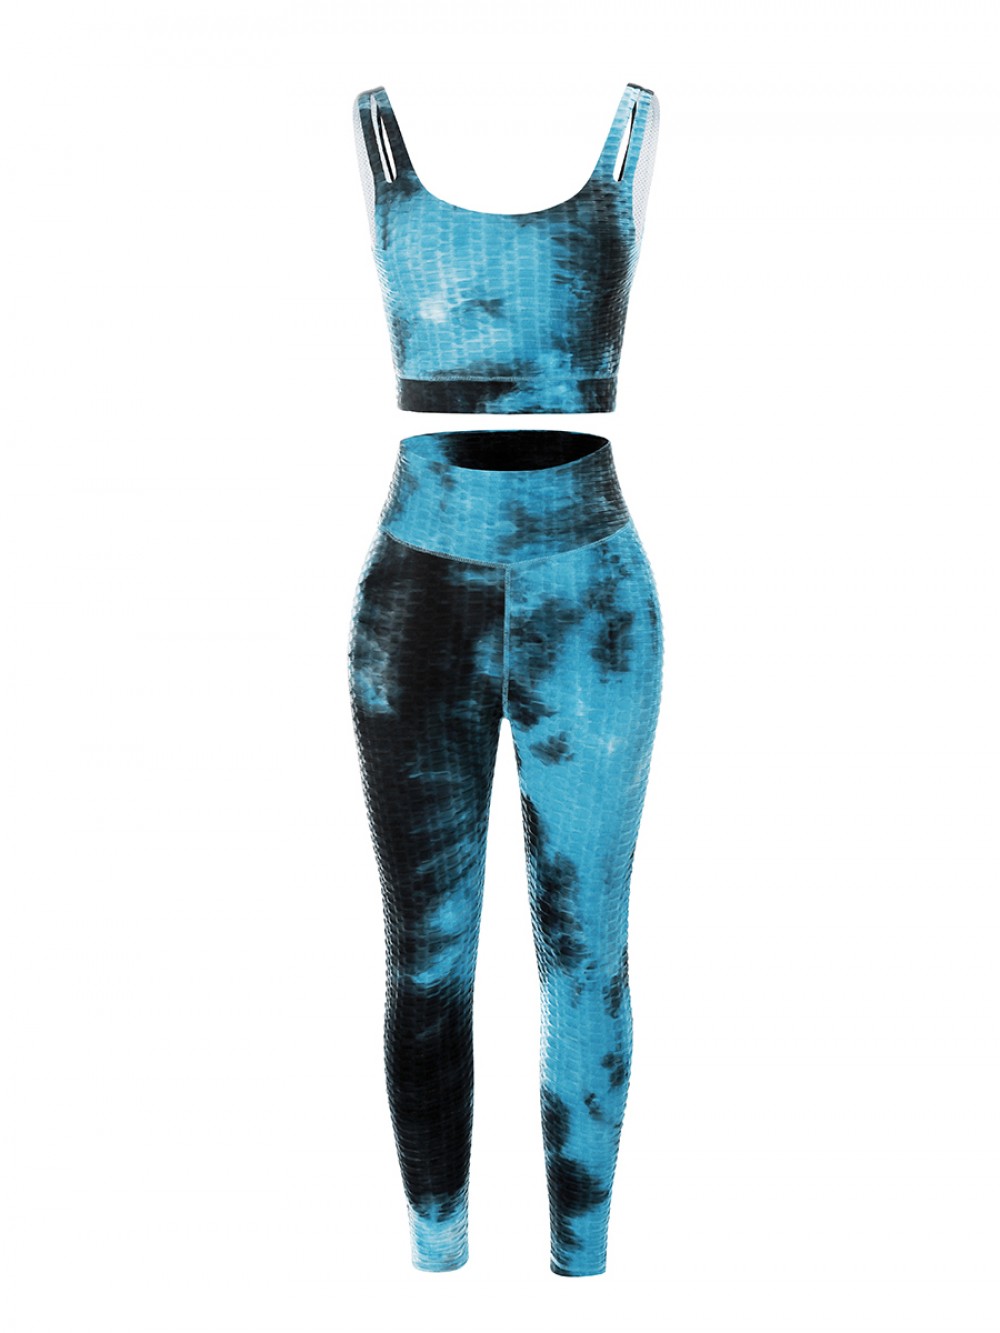 Blue High Waist Tie-Dyed Print Yogawear Suit Workout Activewear